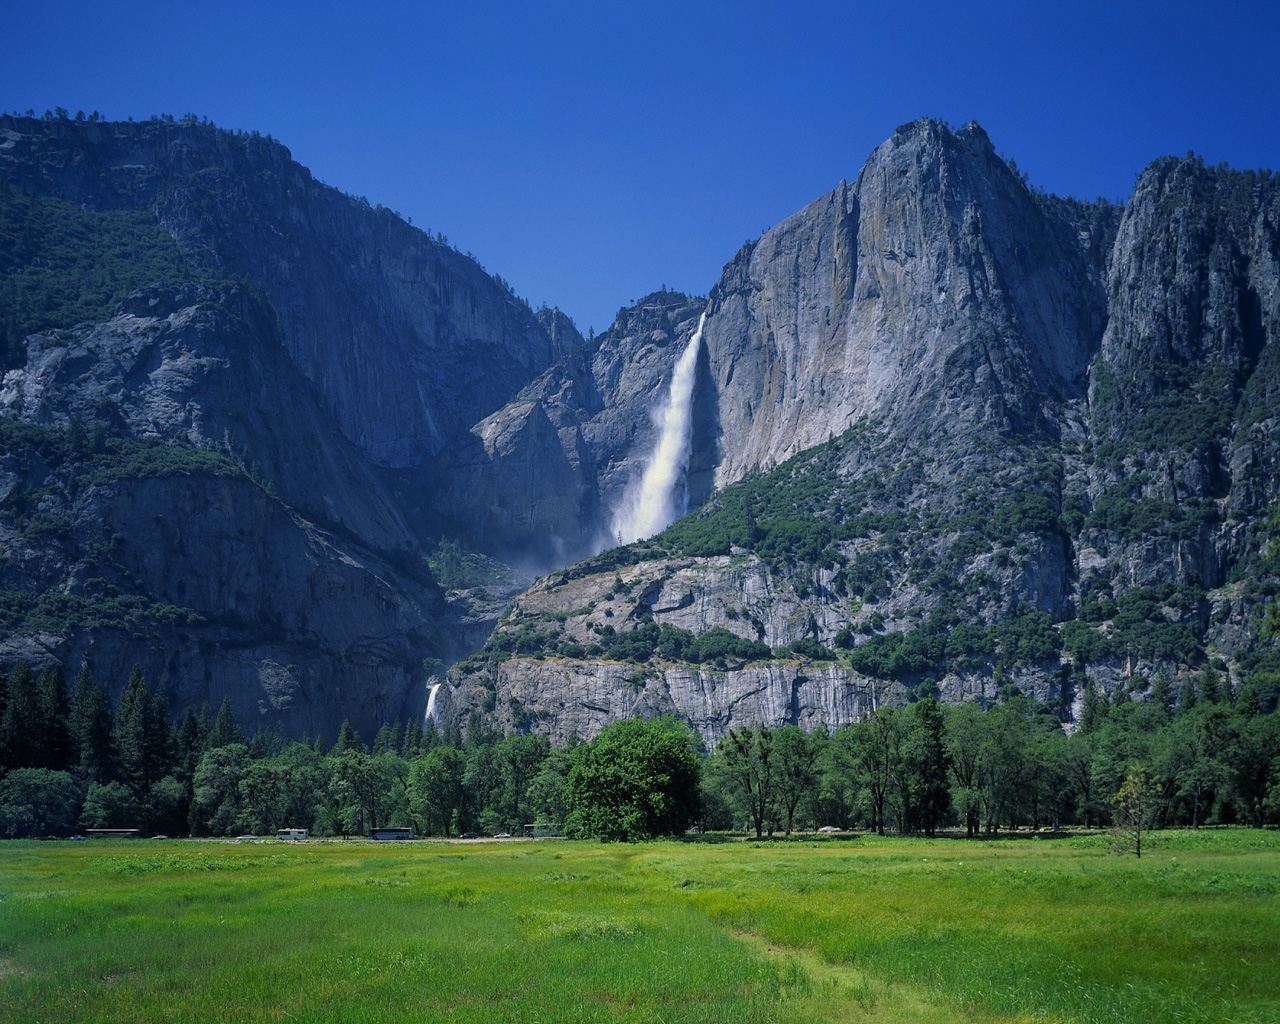  Exclusive Yosemite National Park Wallpapers